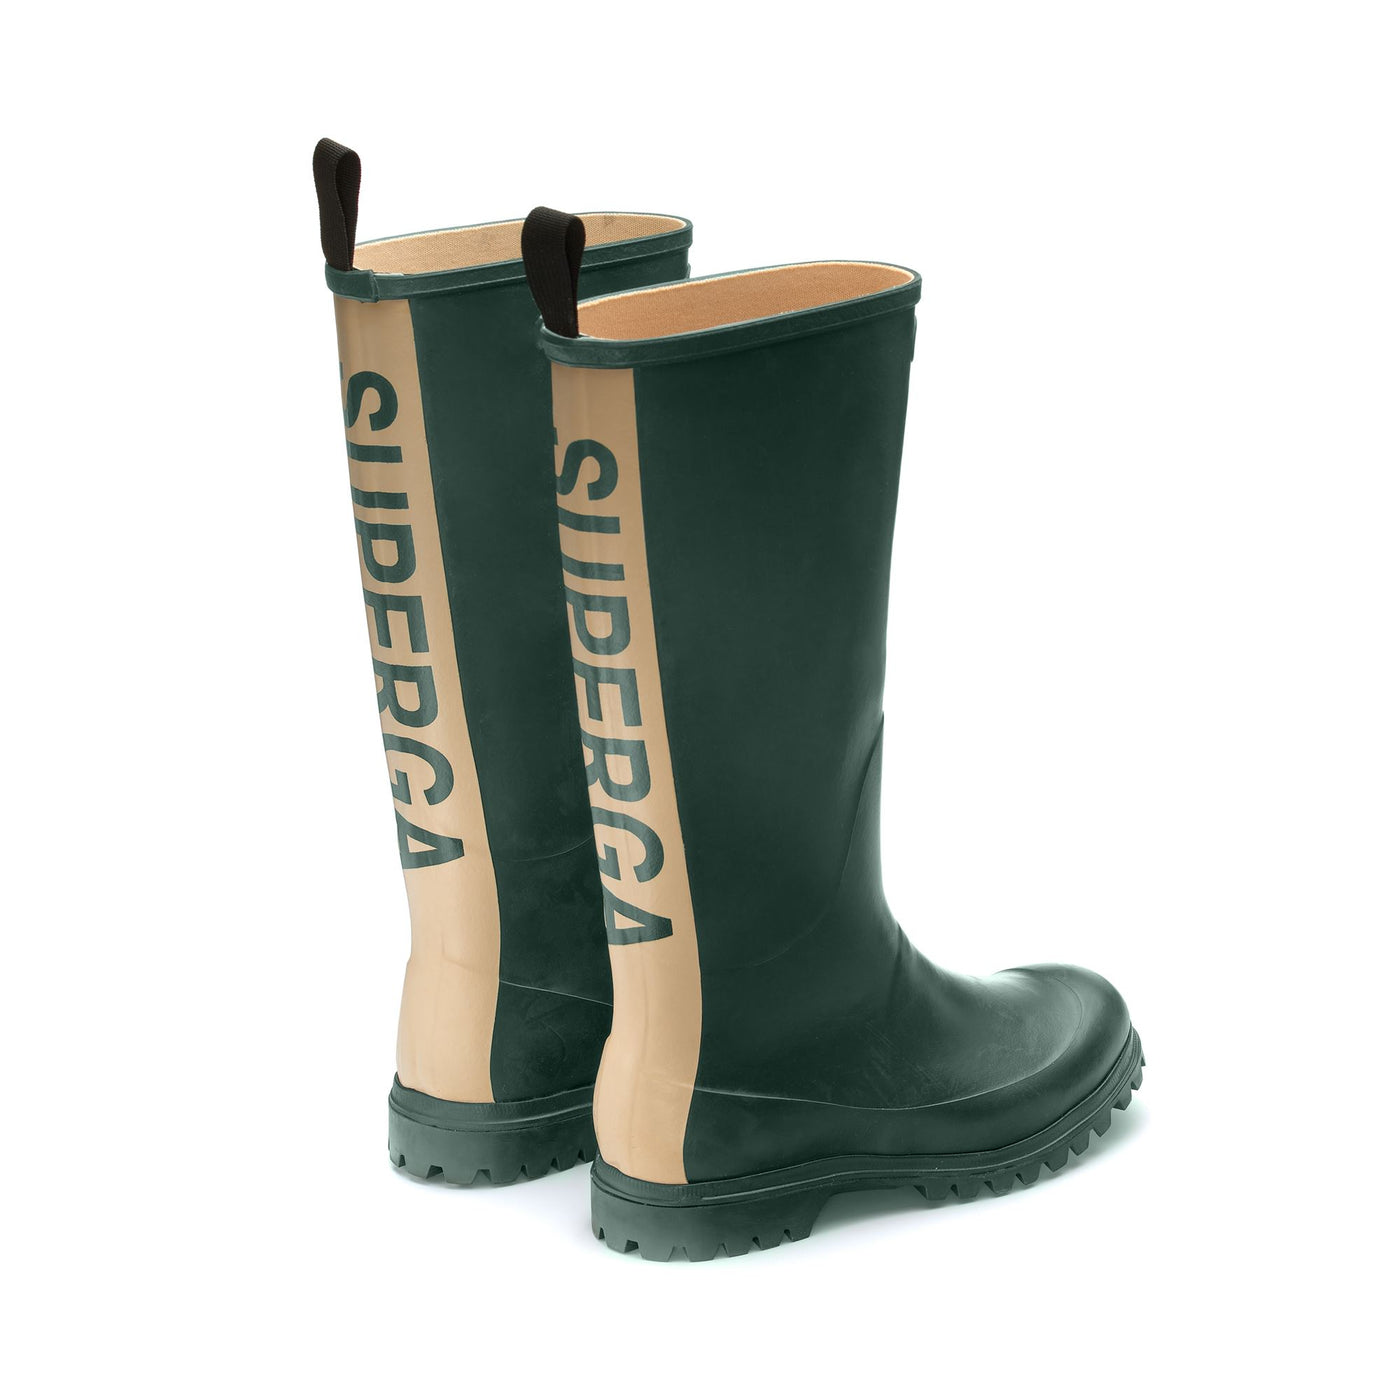 Rubber Boots Unisex 799 RUBBER BOOTS LETTERING High Cut GREEN DK FOREST-OFF WHITE Dressed Side (jpg Rgb)		